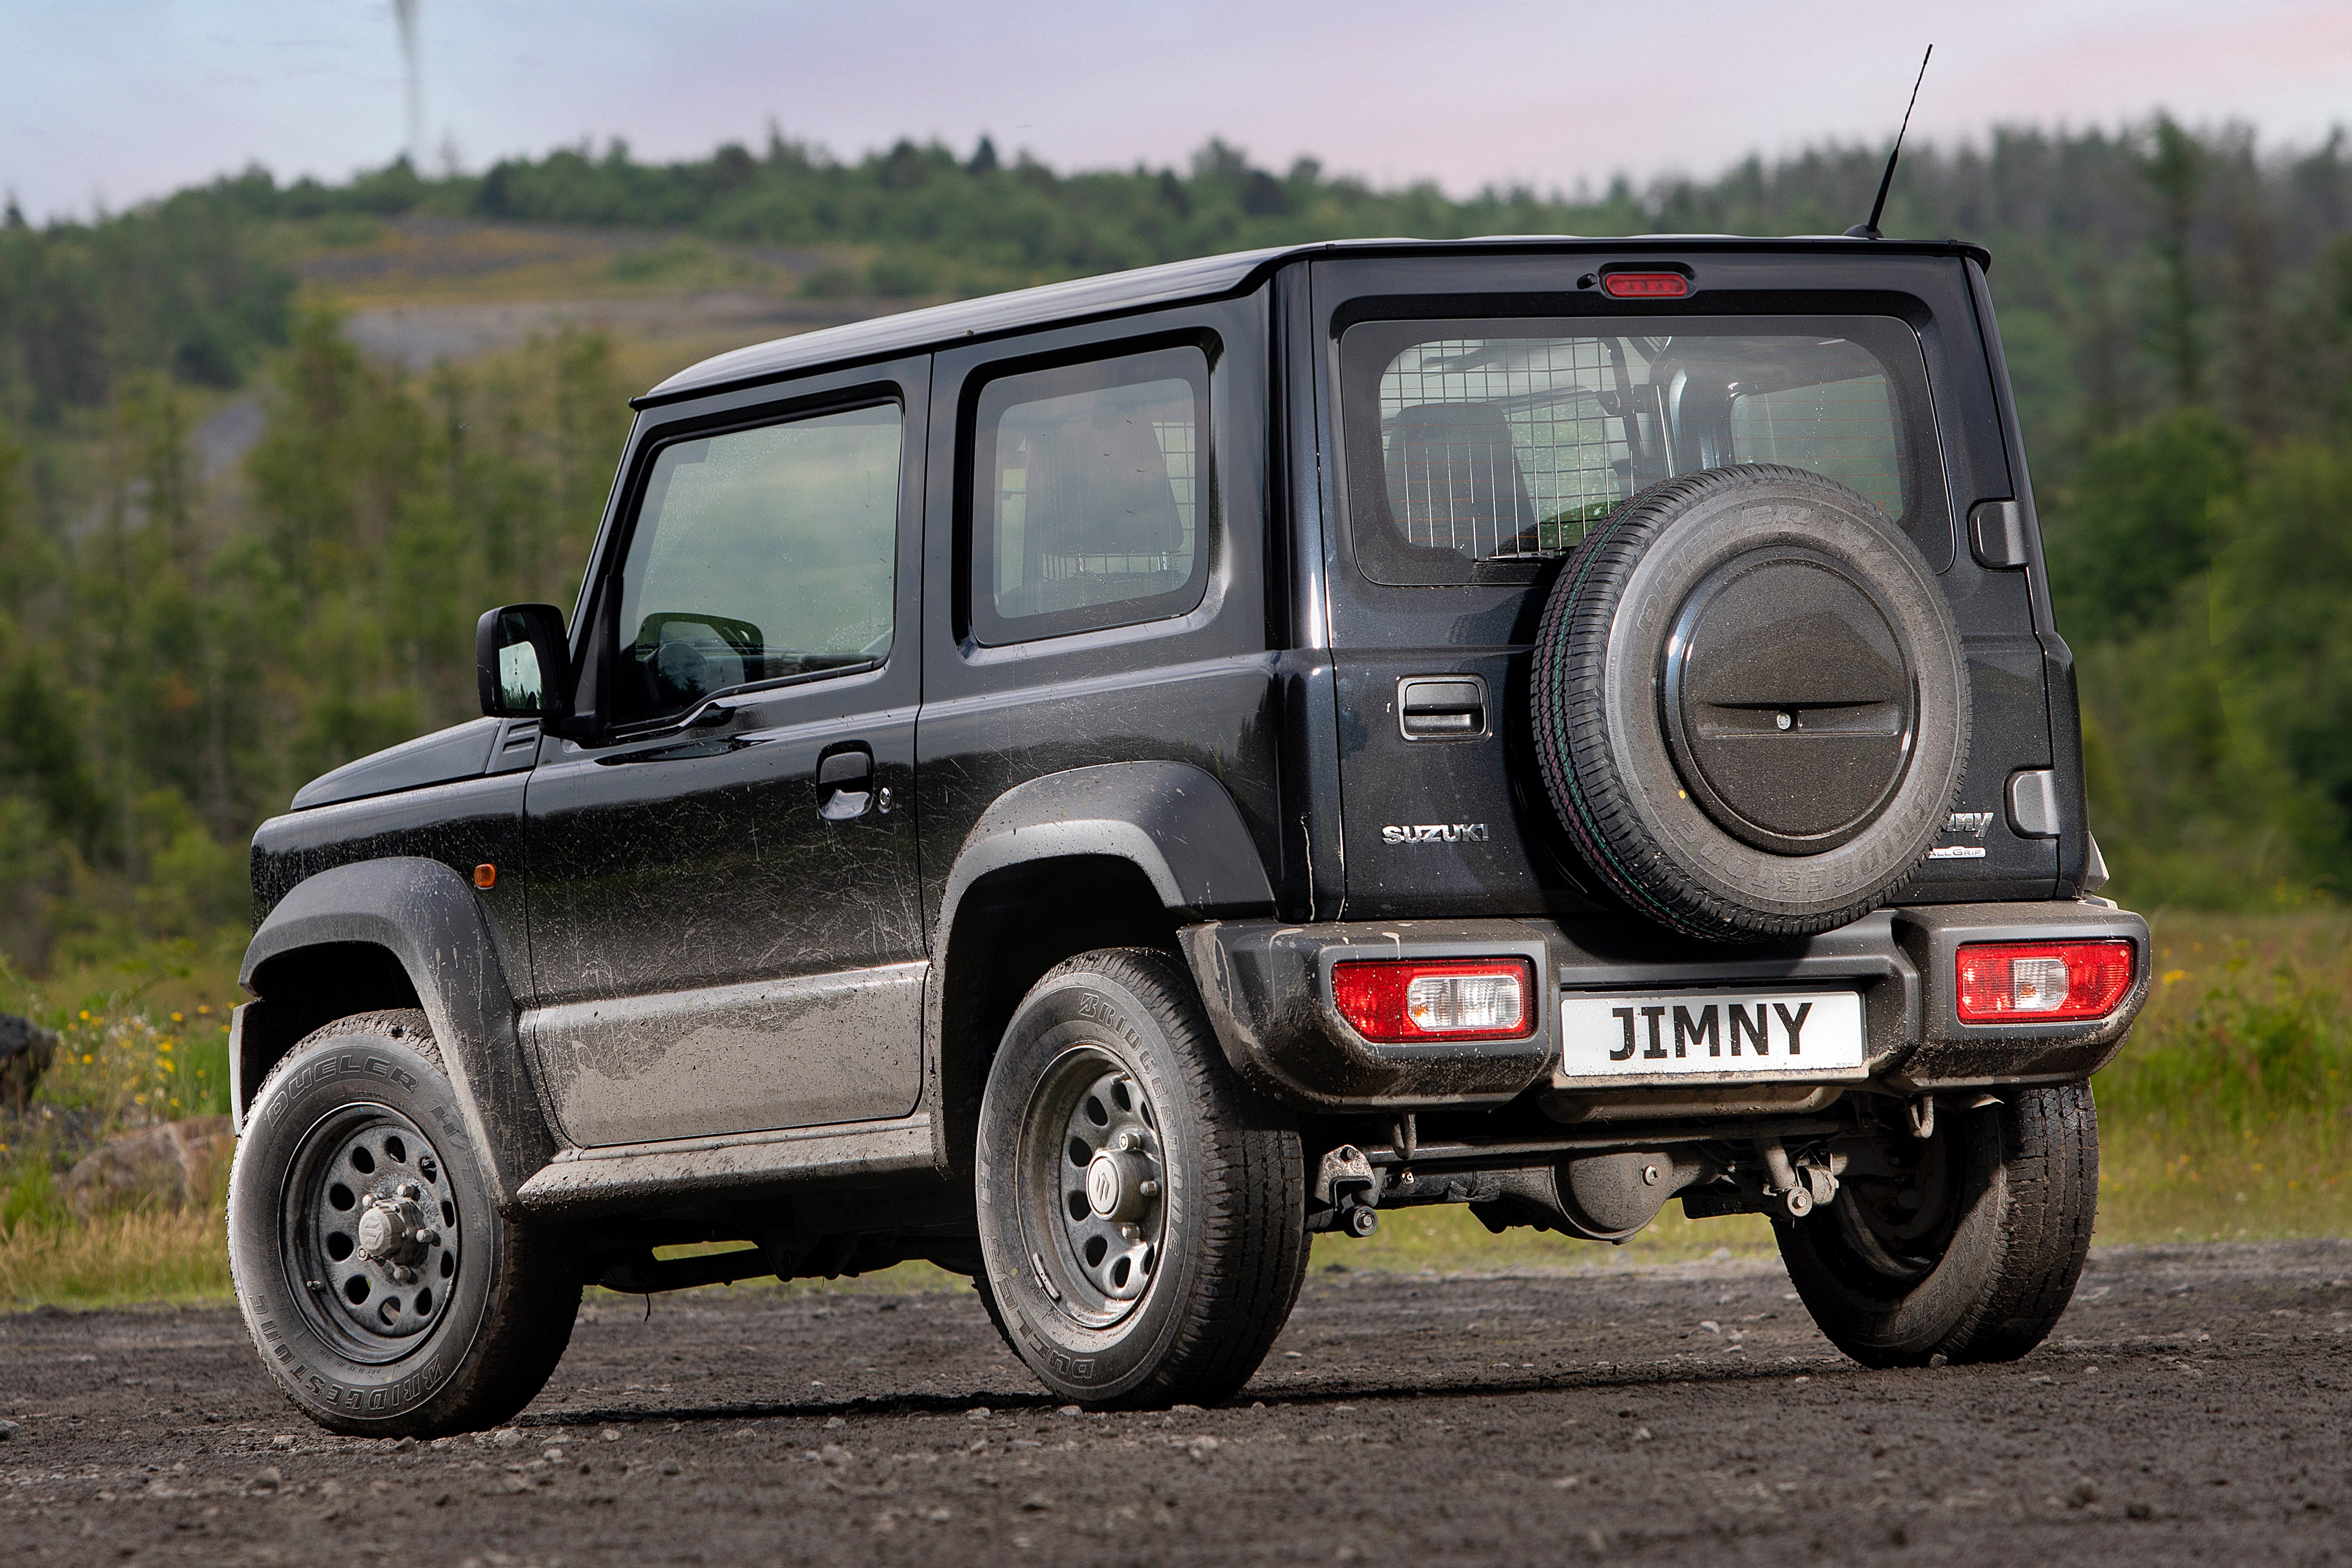 The Suzuki Jimny Commercial is sold in very limited numbers in the UK. That means prices are high. Very high...